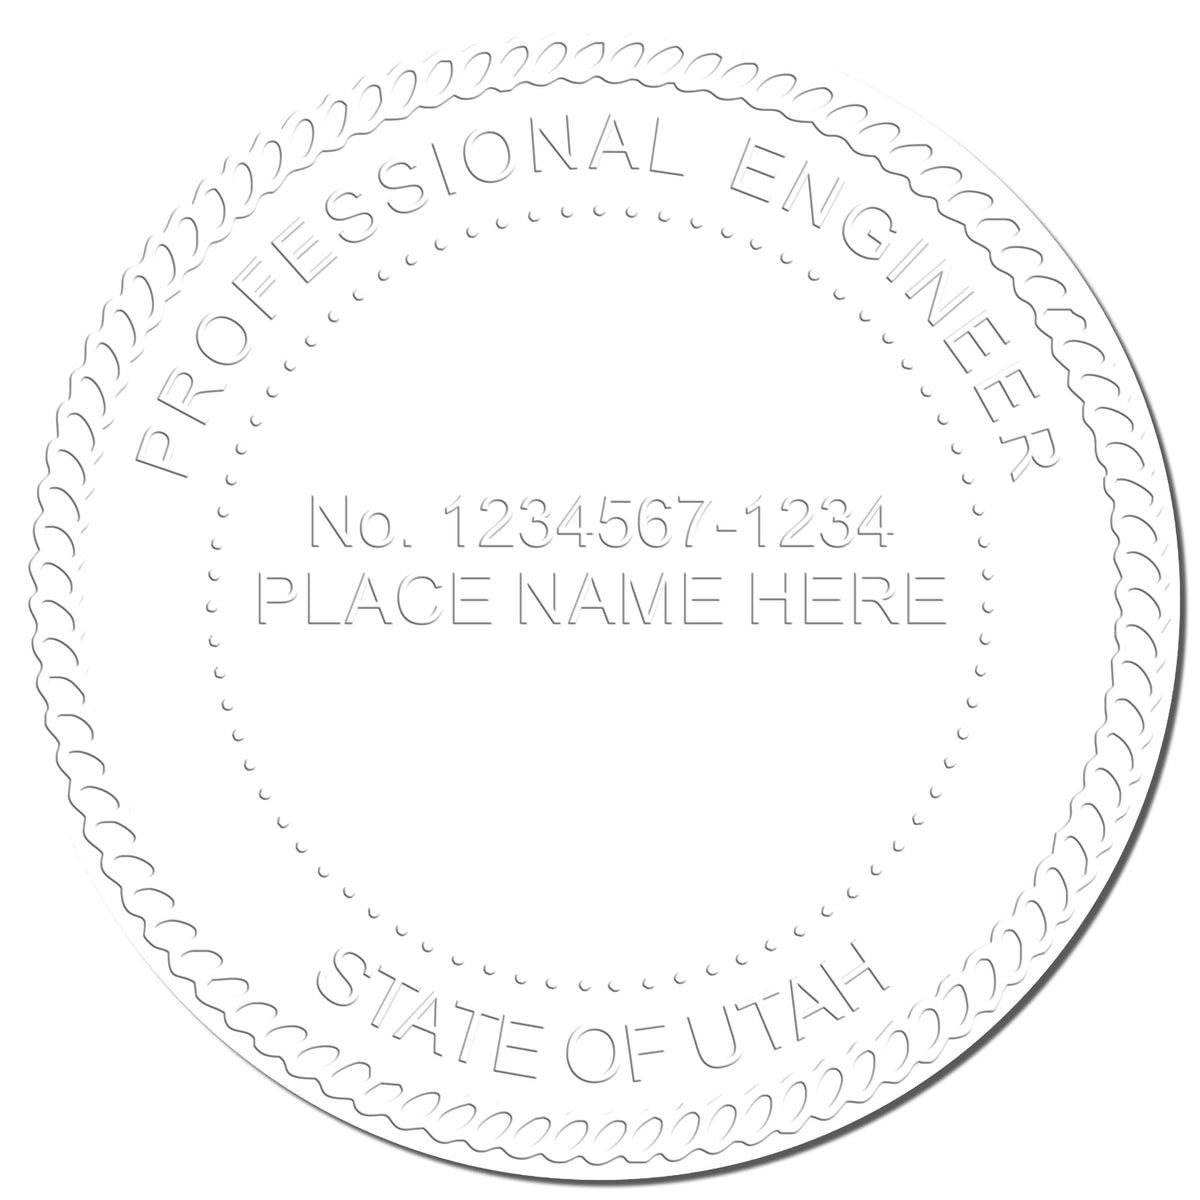 This paper is stamped with a sample imprint of the Hybrid Utah Engineer Seal, signifying its quality and reliability.